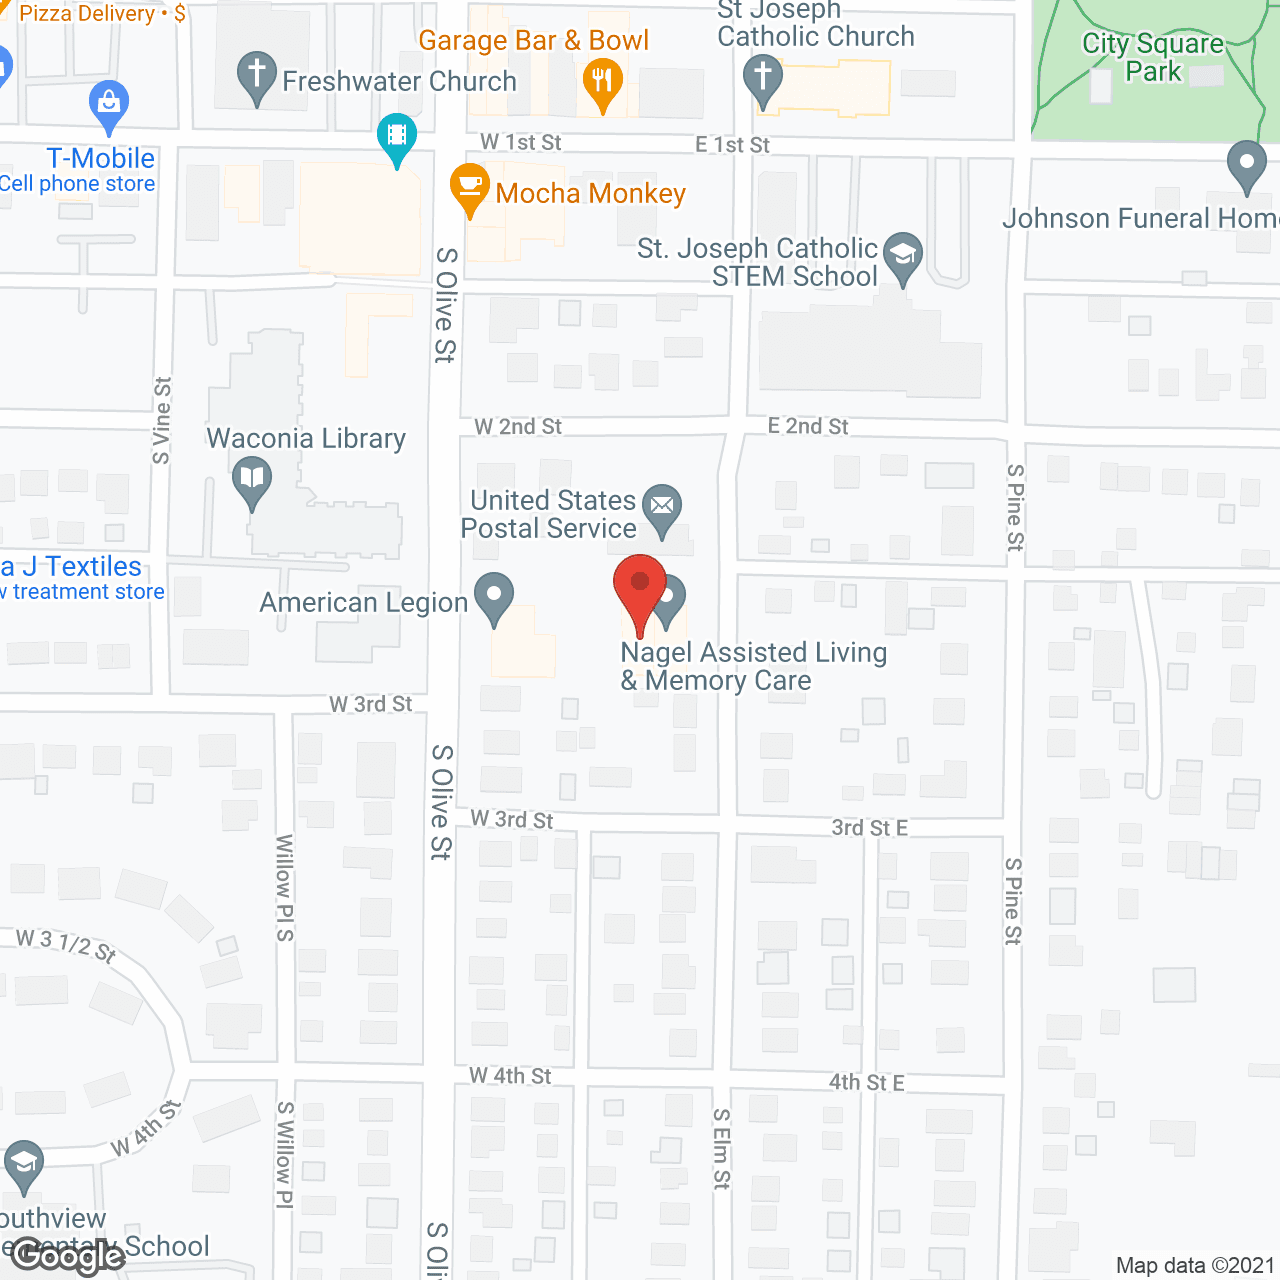 Nagel Assisted Living and Memory Care in google map